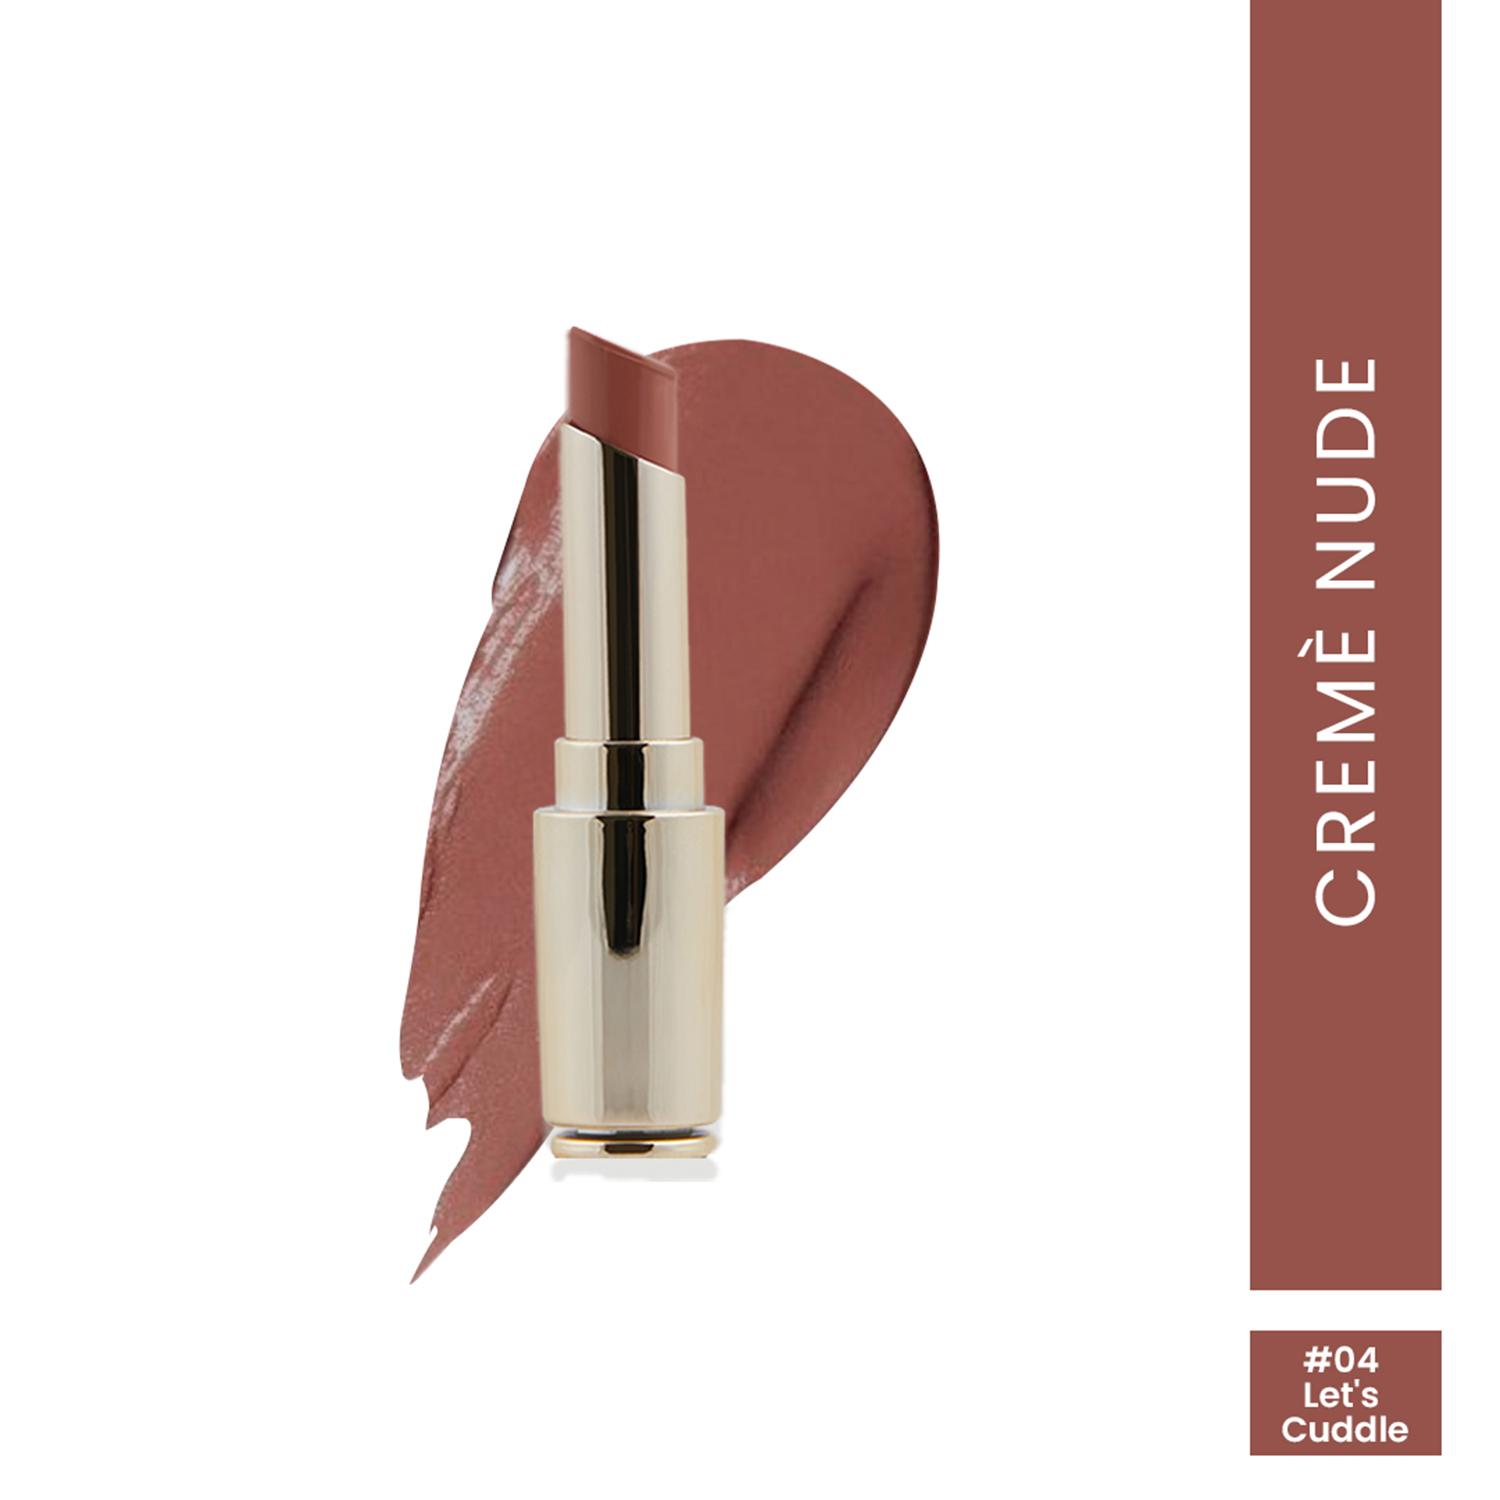 Charmacy Milano | Charmacy Milano Flattering Nude Lipstick - 04 Lets Cuddle (3.8g)